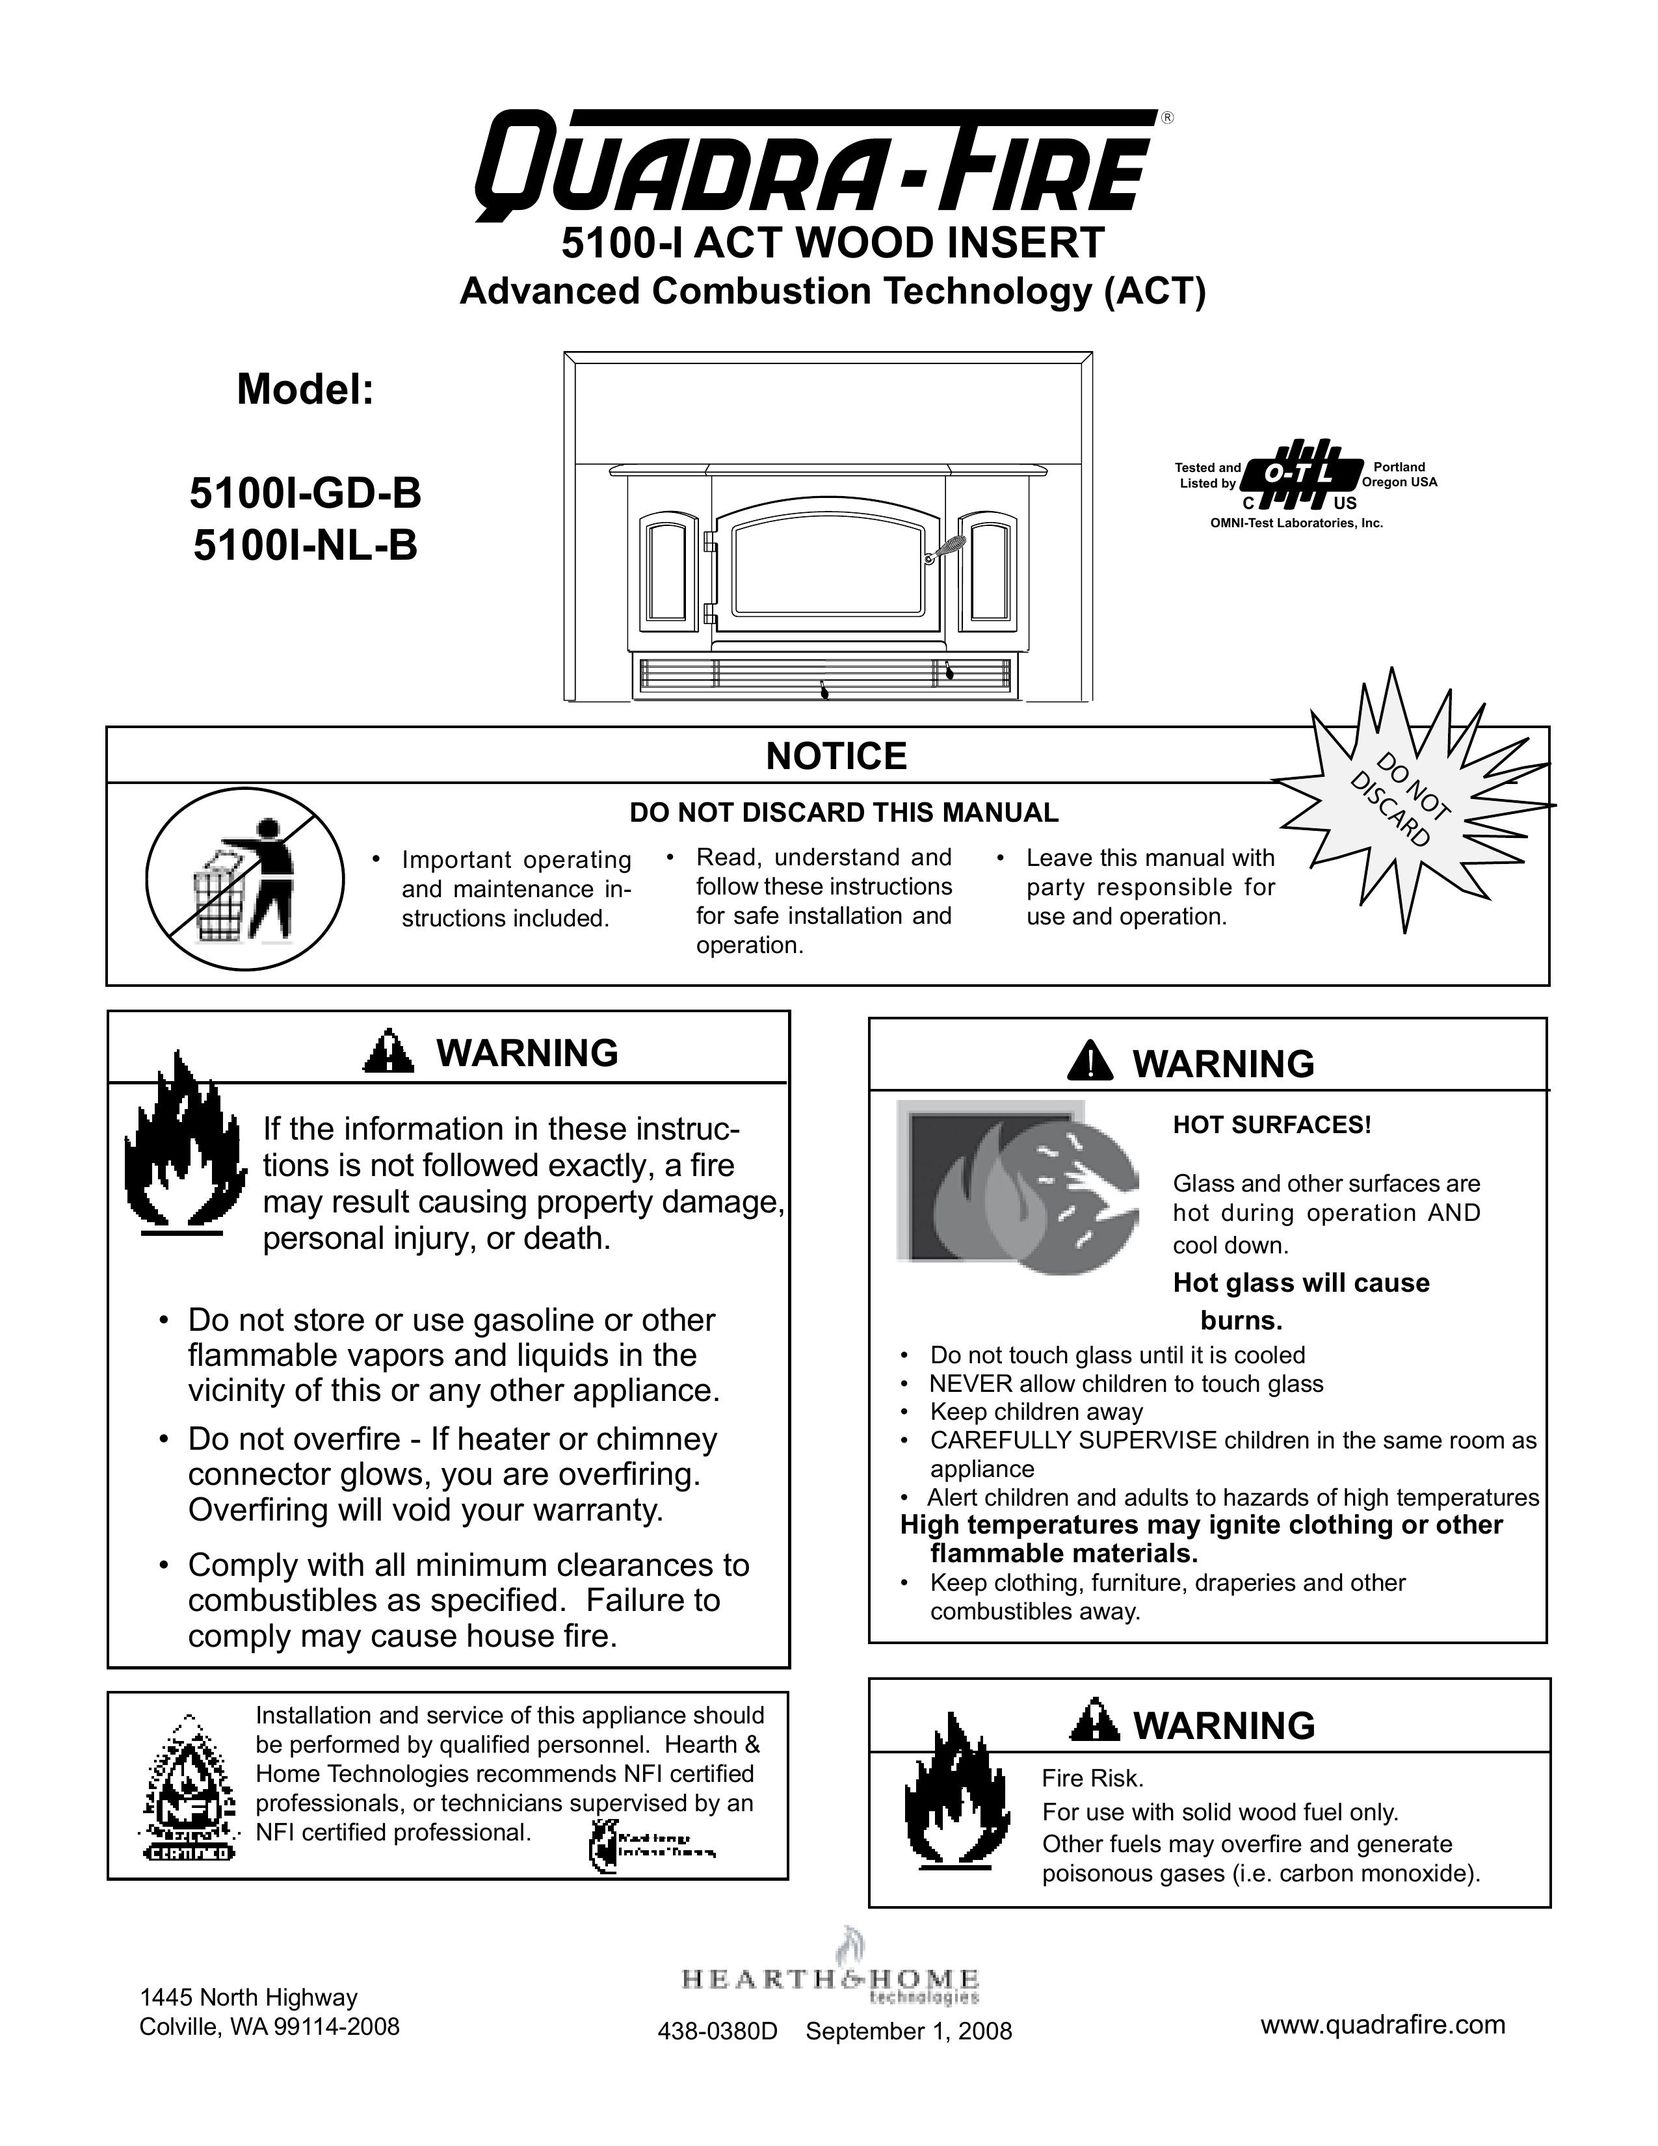 Hearth and Home Technologies 5100I-GD-B Indoor Fireplace User Manual